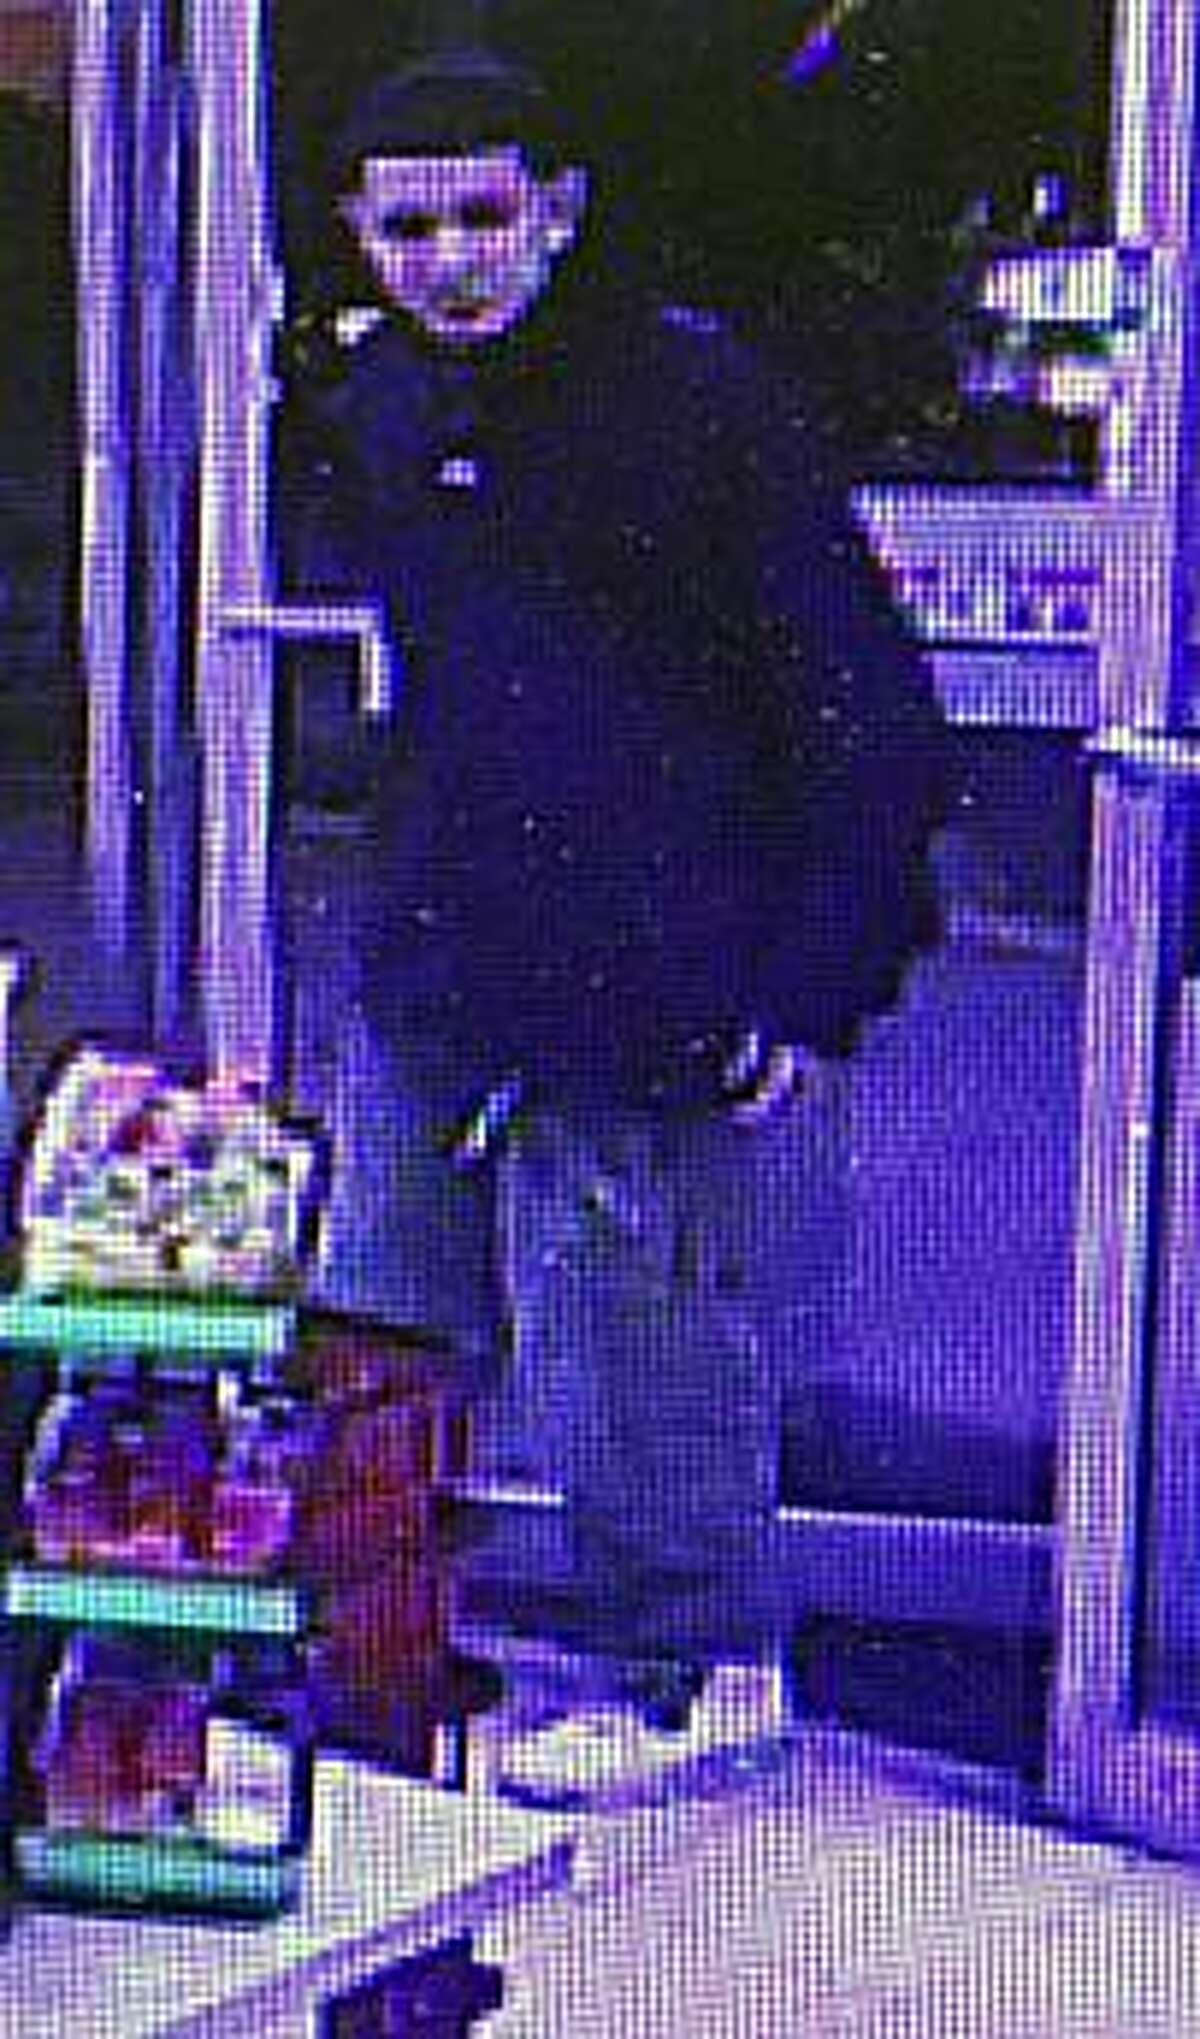 Police are looking for this man, who they said stole a pickup truck from the 7-Eleven parking lot Wednesday morning in Fairfield.